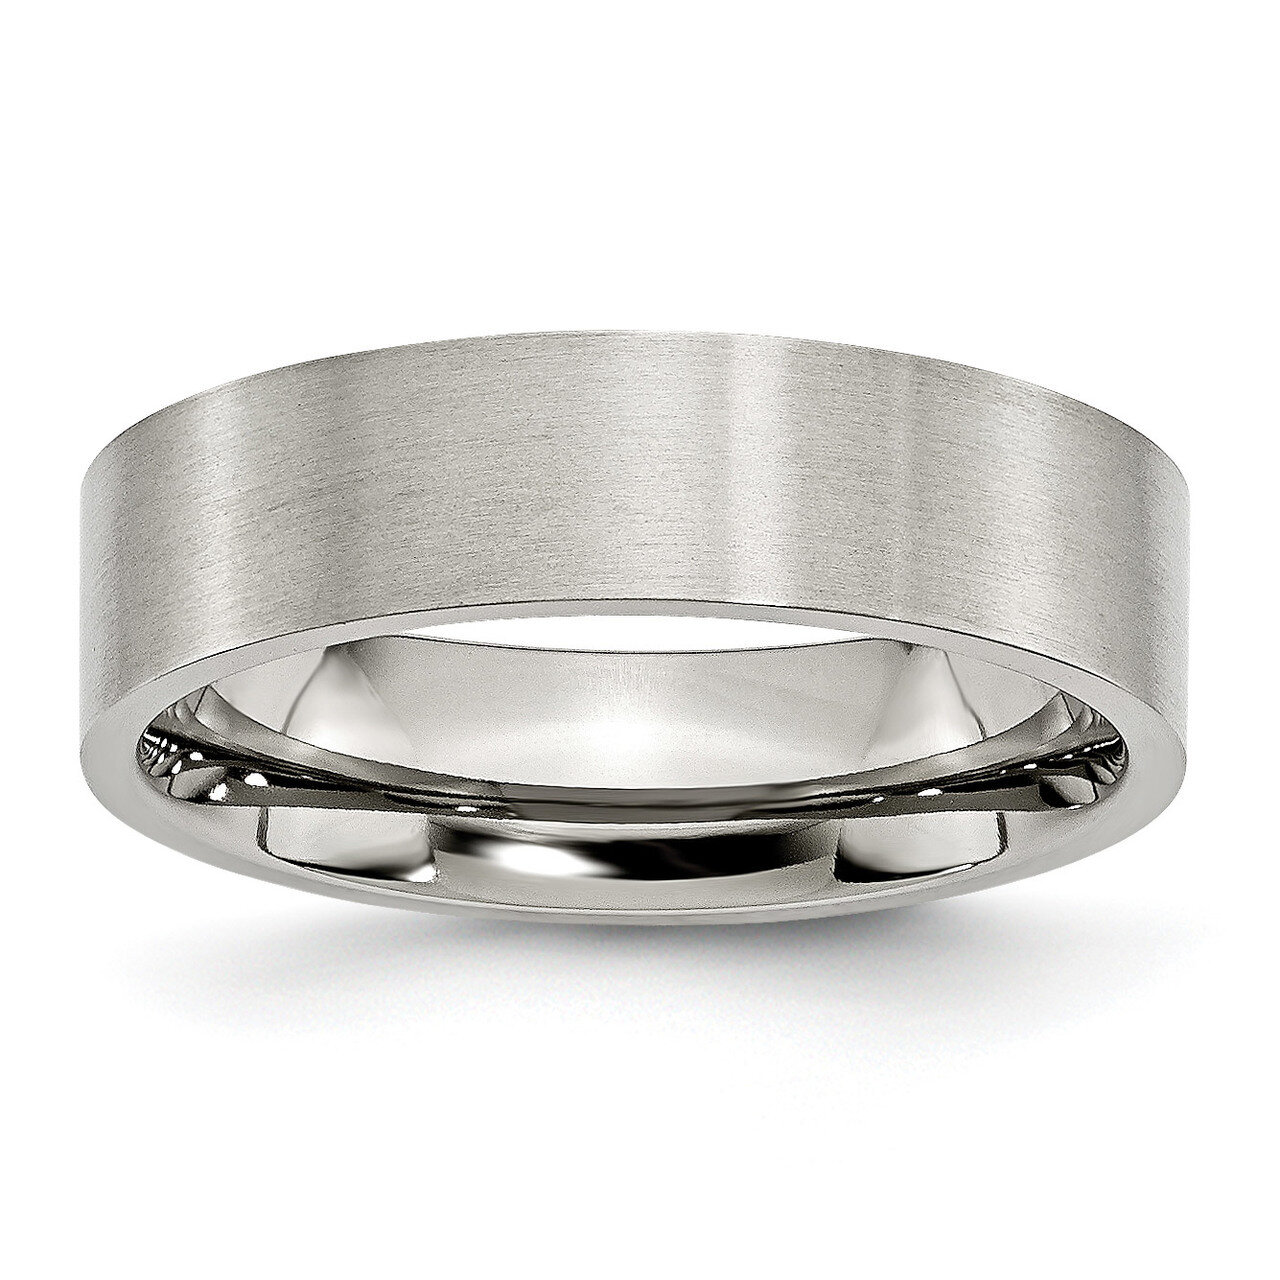 Flat 6mm Brushed Band Stainless Steel SR5 Engravable